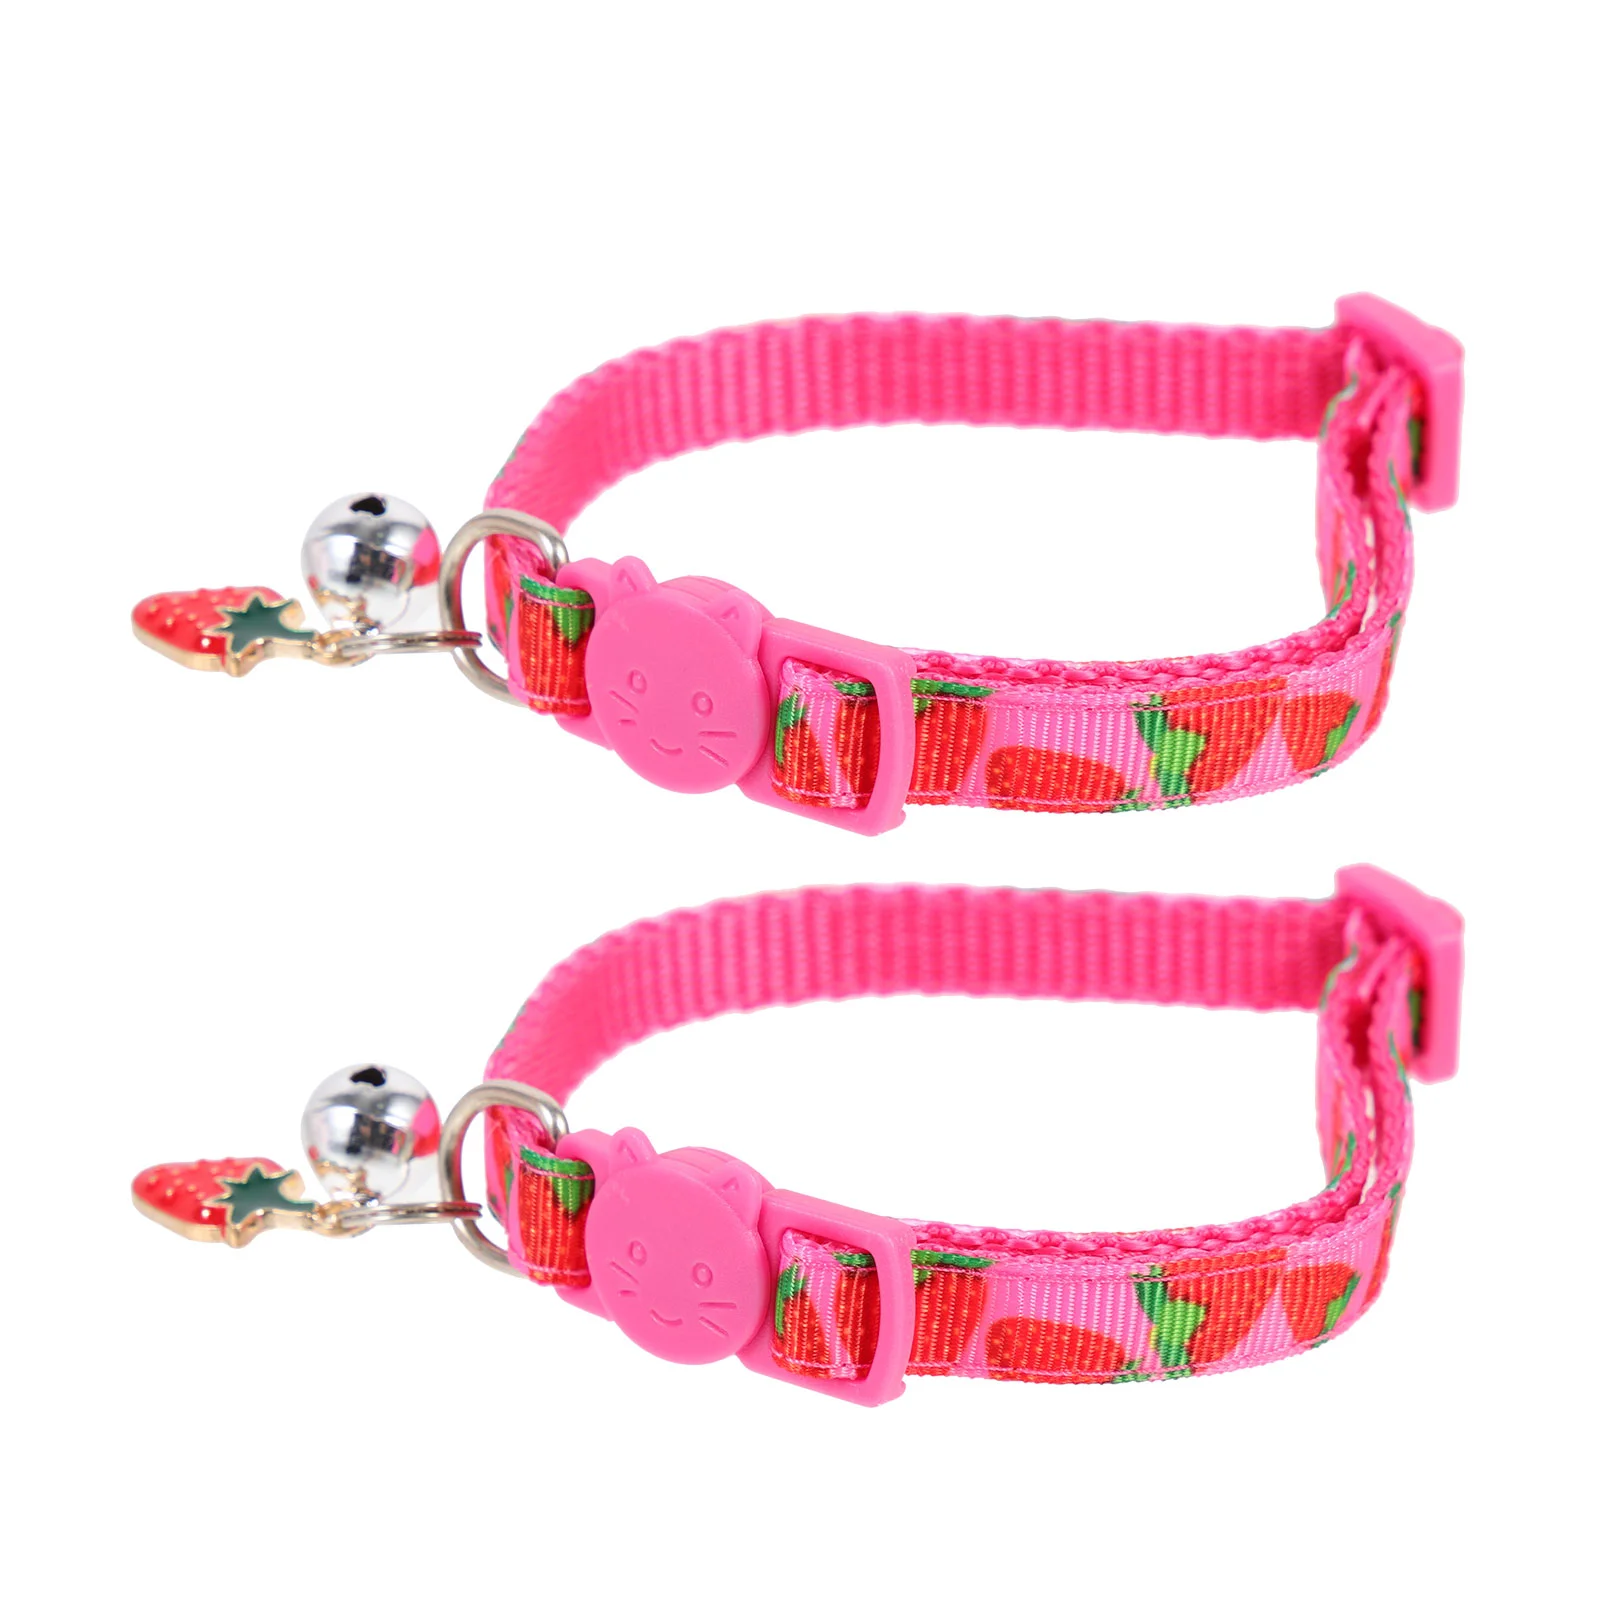 

2 Pcs Necklace Pet Fruit Collar Strawberry Printing Cat Kitten Ornament Lightweight with Bell